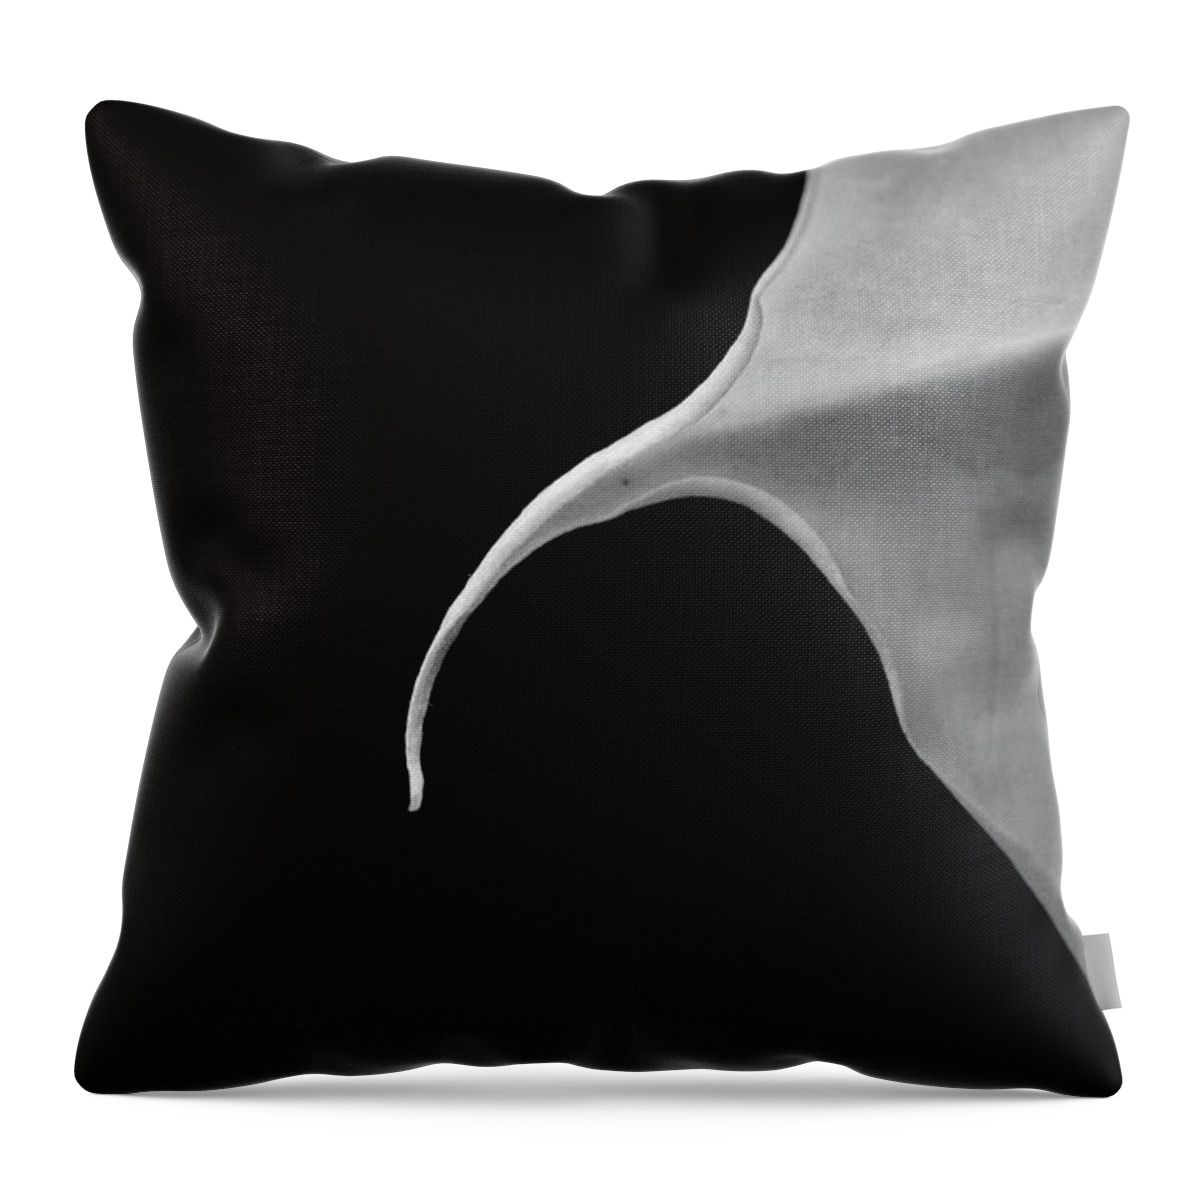 Flower Throw Pillow featuring the photograph Flower Abstract by Crystal Wightman